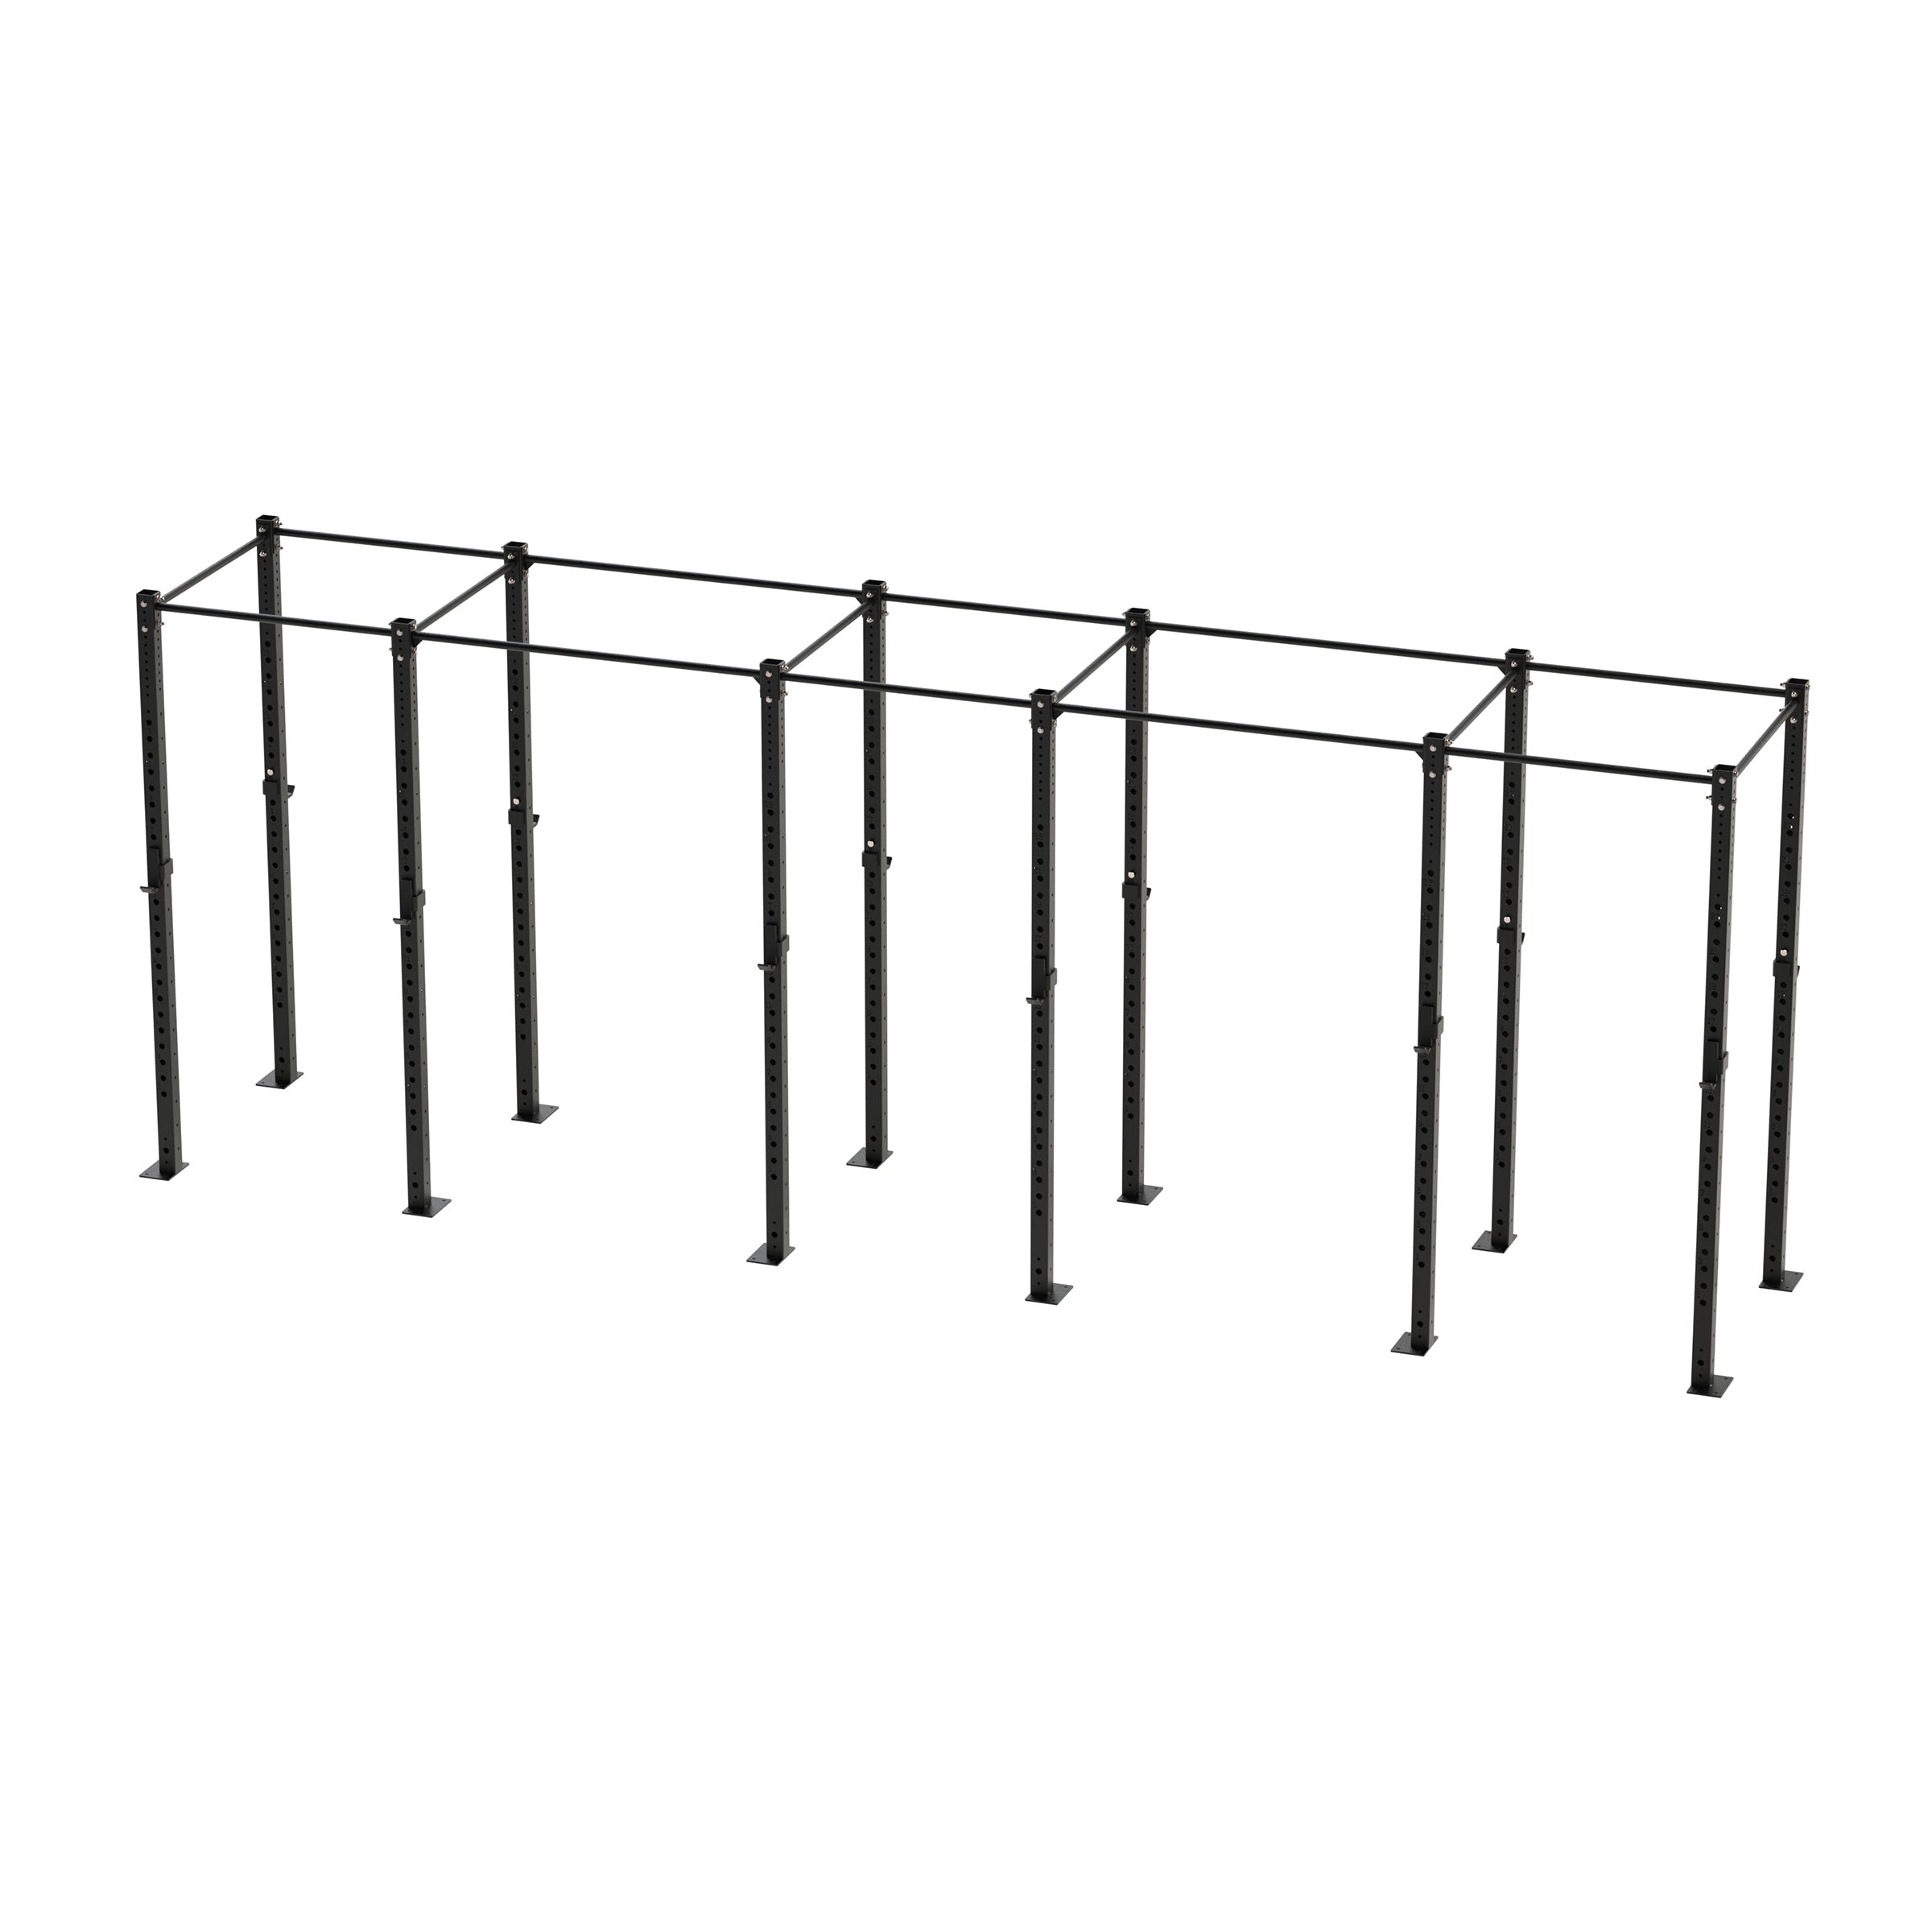 Bison Series - 6 Bay Freestanding Rig - Wolverson Fitness